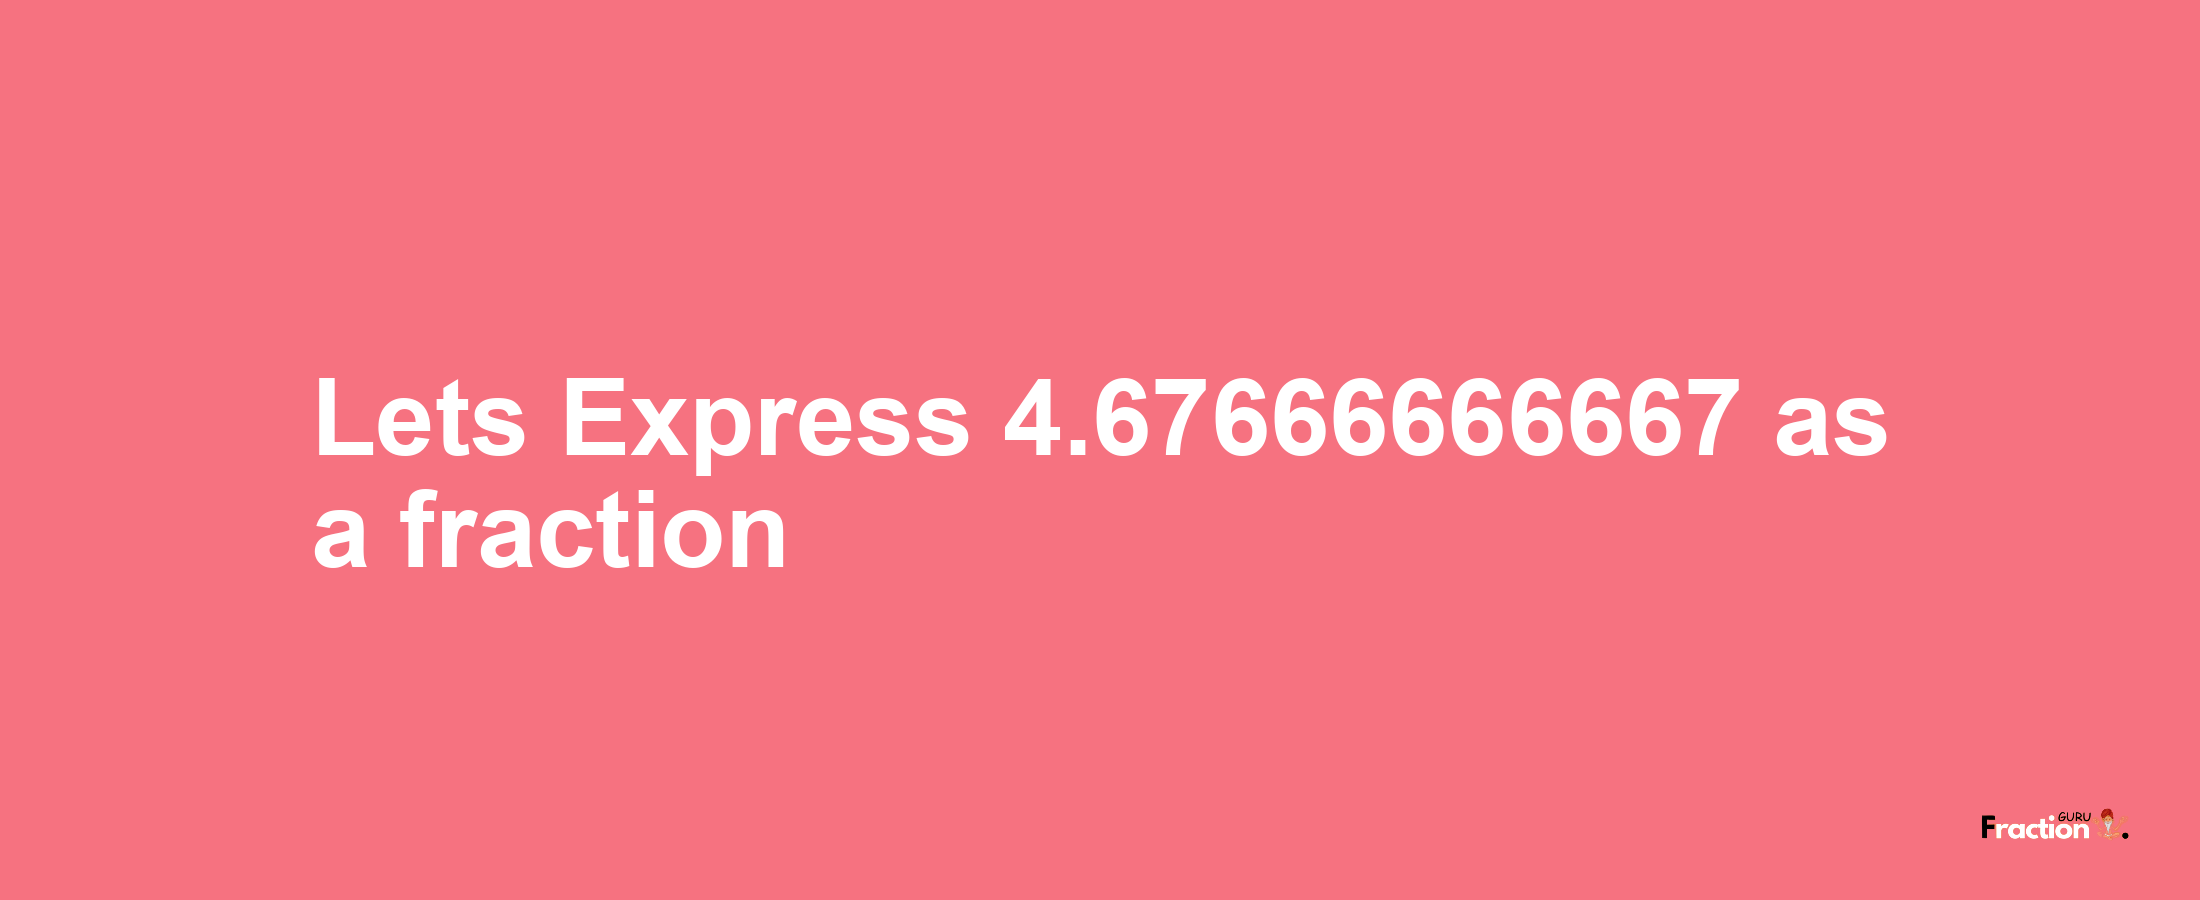 Lets Express 4.67666666667 as afraction